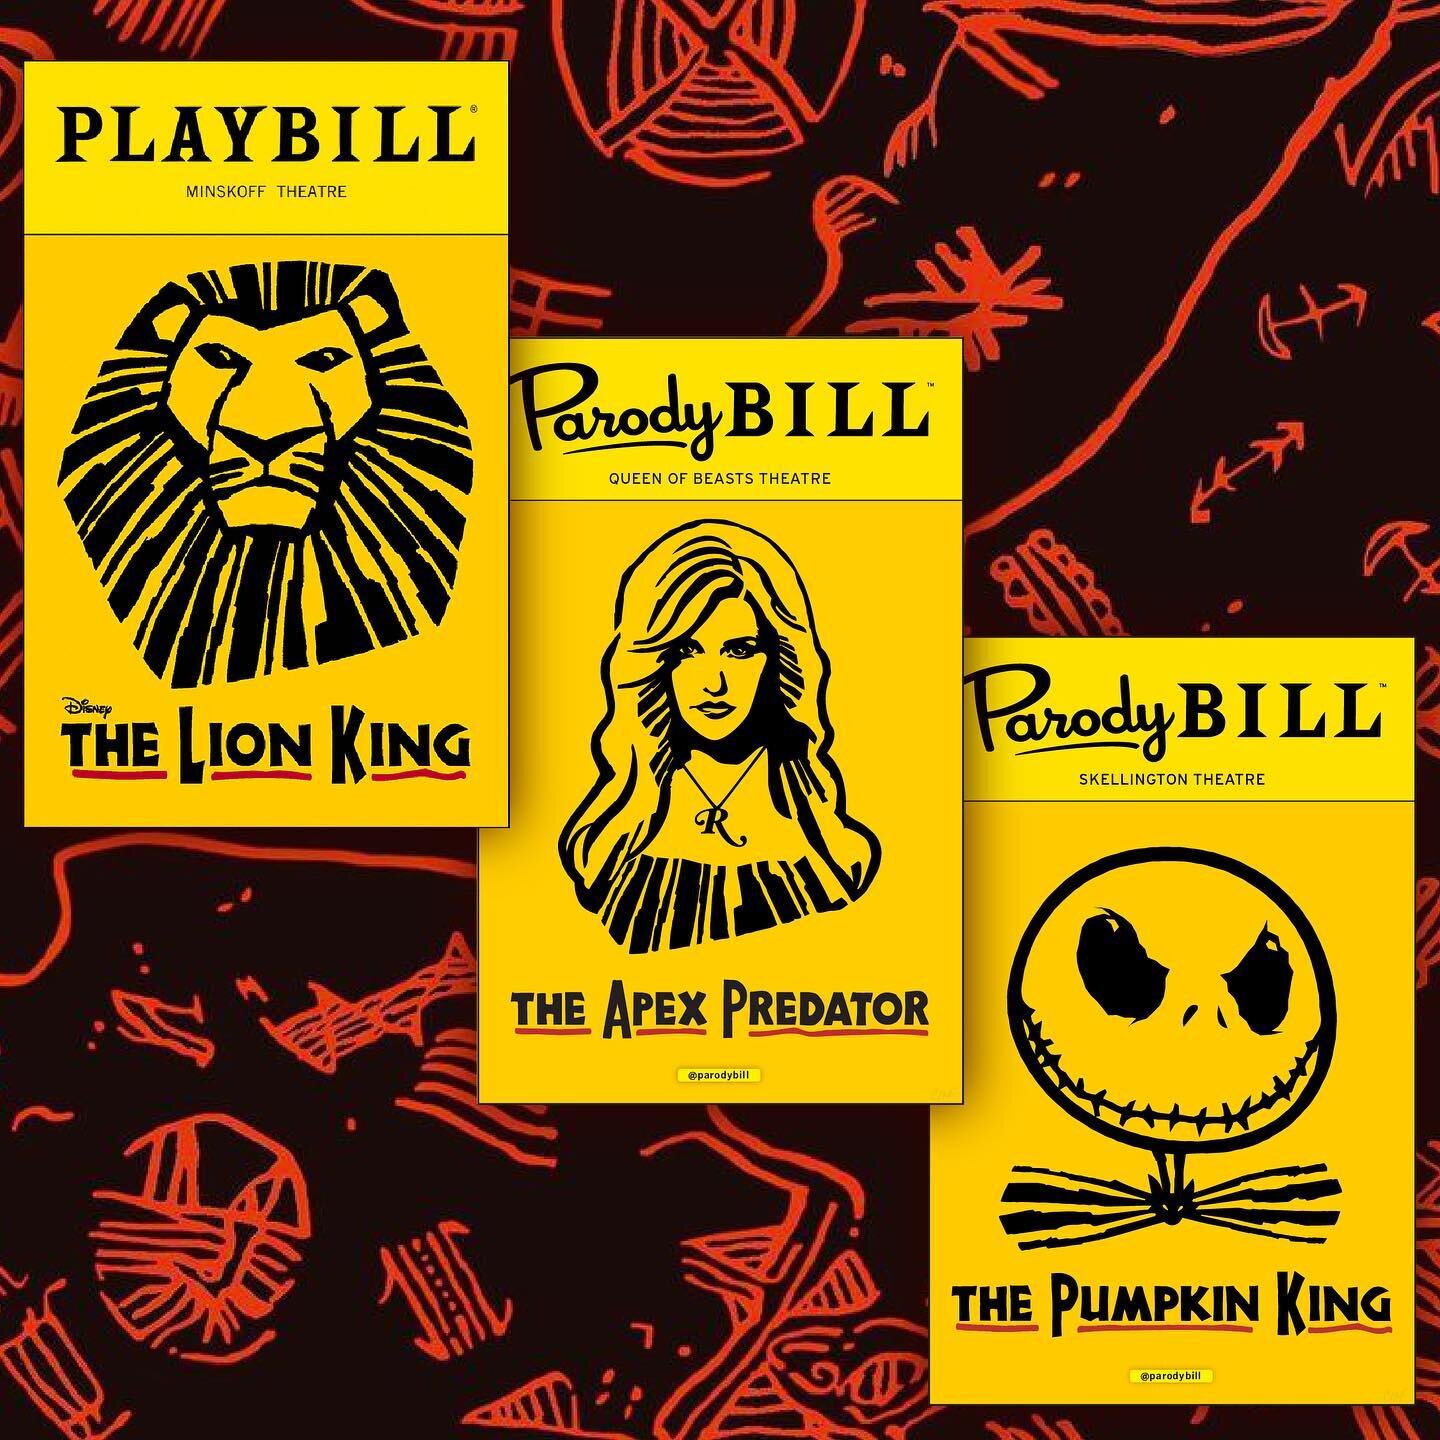 The Lion King roars into 10,000 performances on Broadway today!
&nbsp; &nbsp; &nbsp; &nbsp; &nbsp; 
We&rsquo;re celebrating this landmark occasion with a look at some of our favorite parodies inspired by this iconic poster art.
&nbsp; &nbsp; &nbsp; &